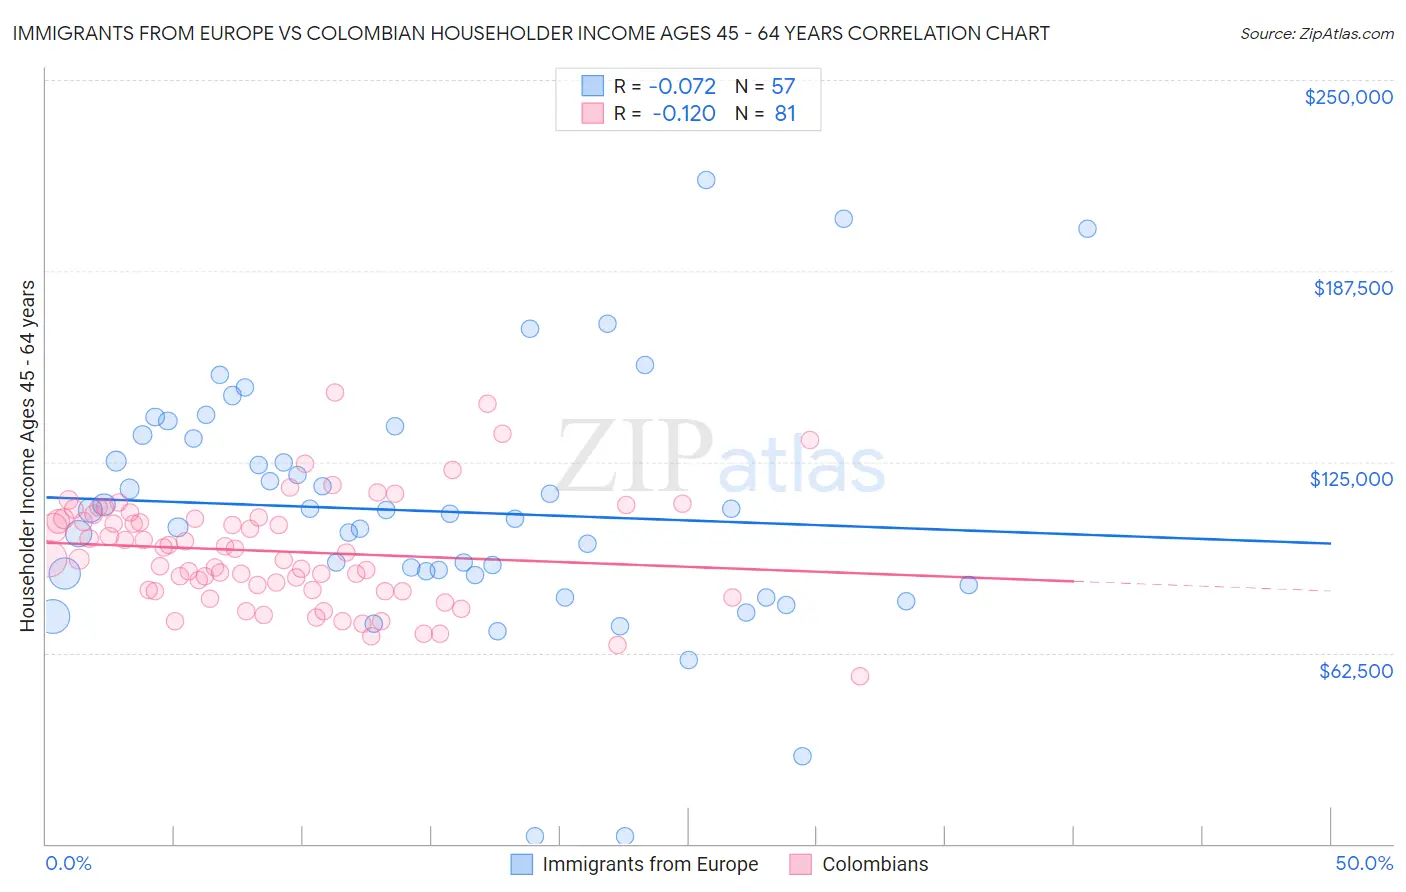 Immigrants from Europe vs Colombian Householder Income Ages 45 - 64 years